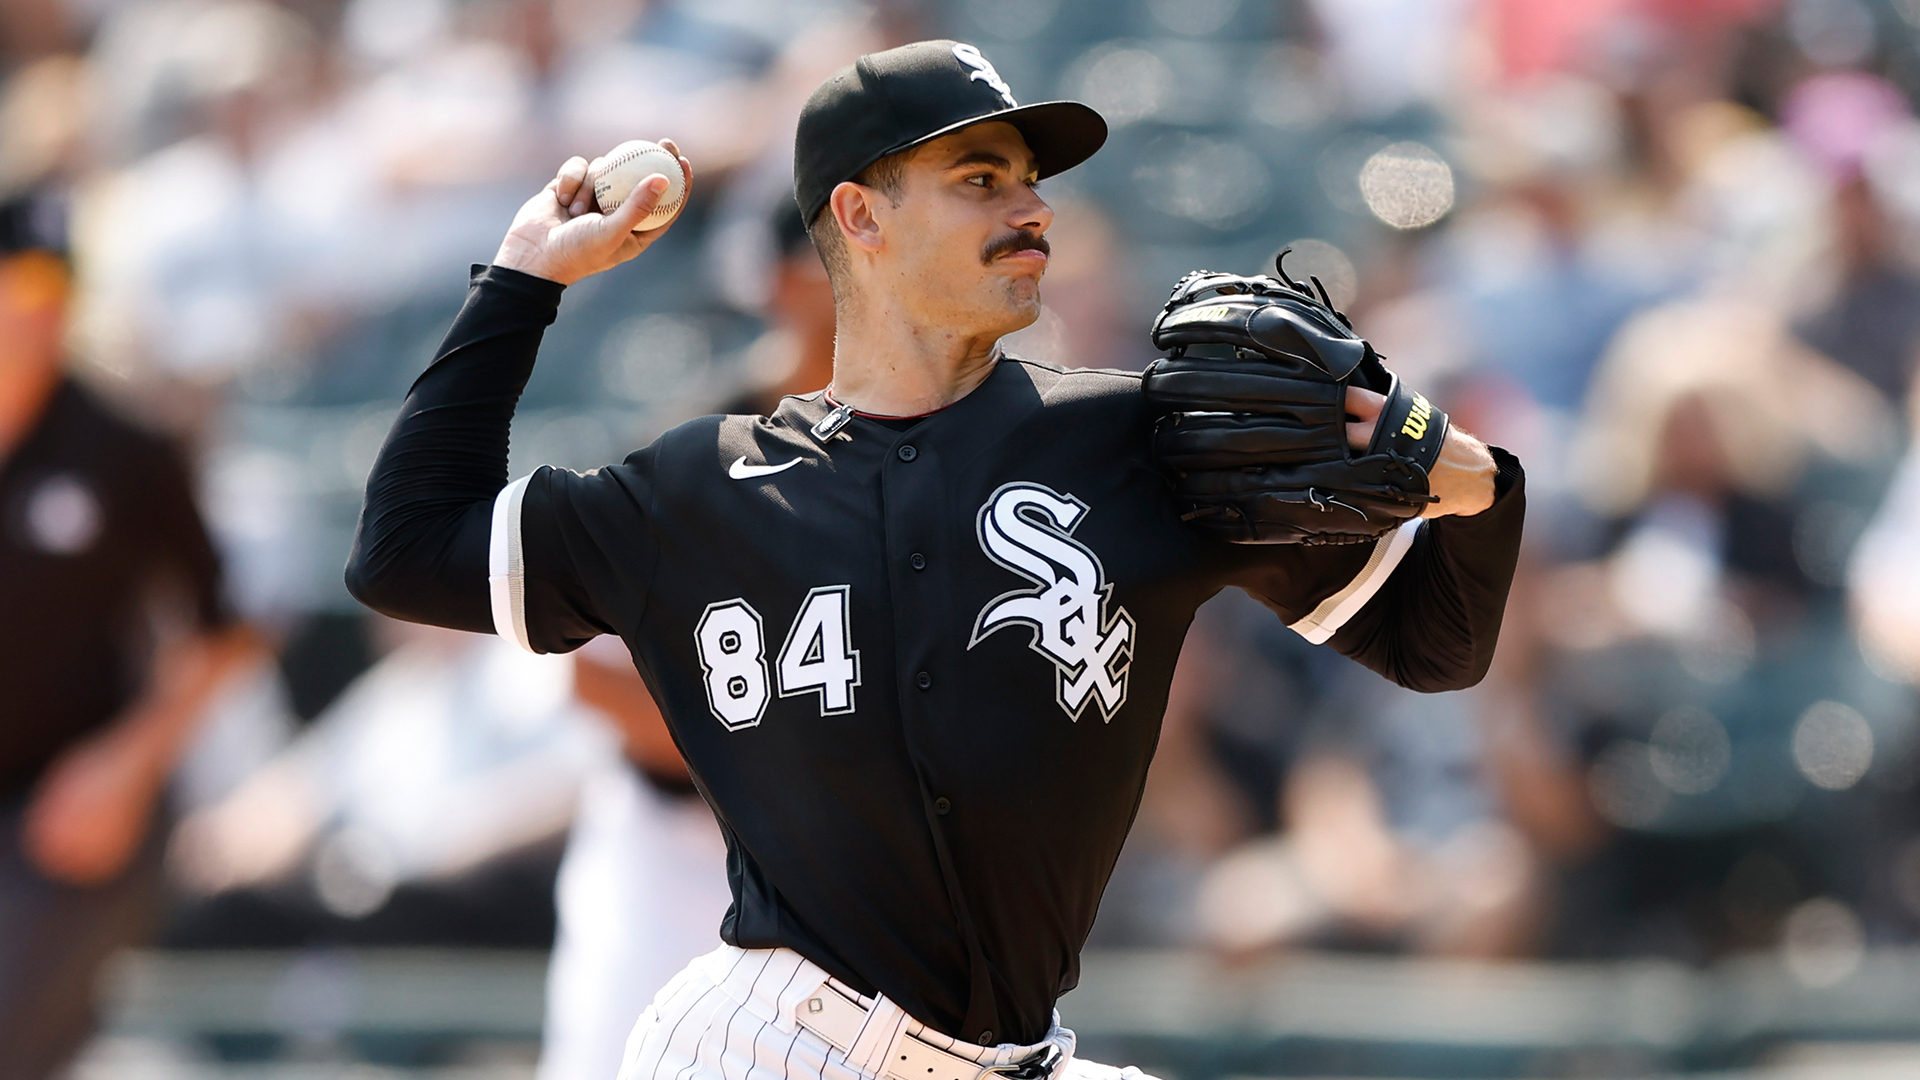 Chicago White Sox Dylan Cease on his All Star Snub, World Baseball Classic  & MORE!